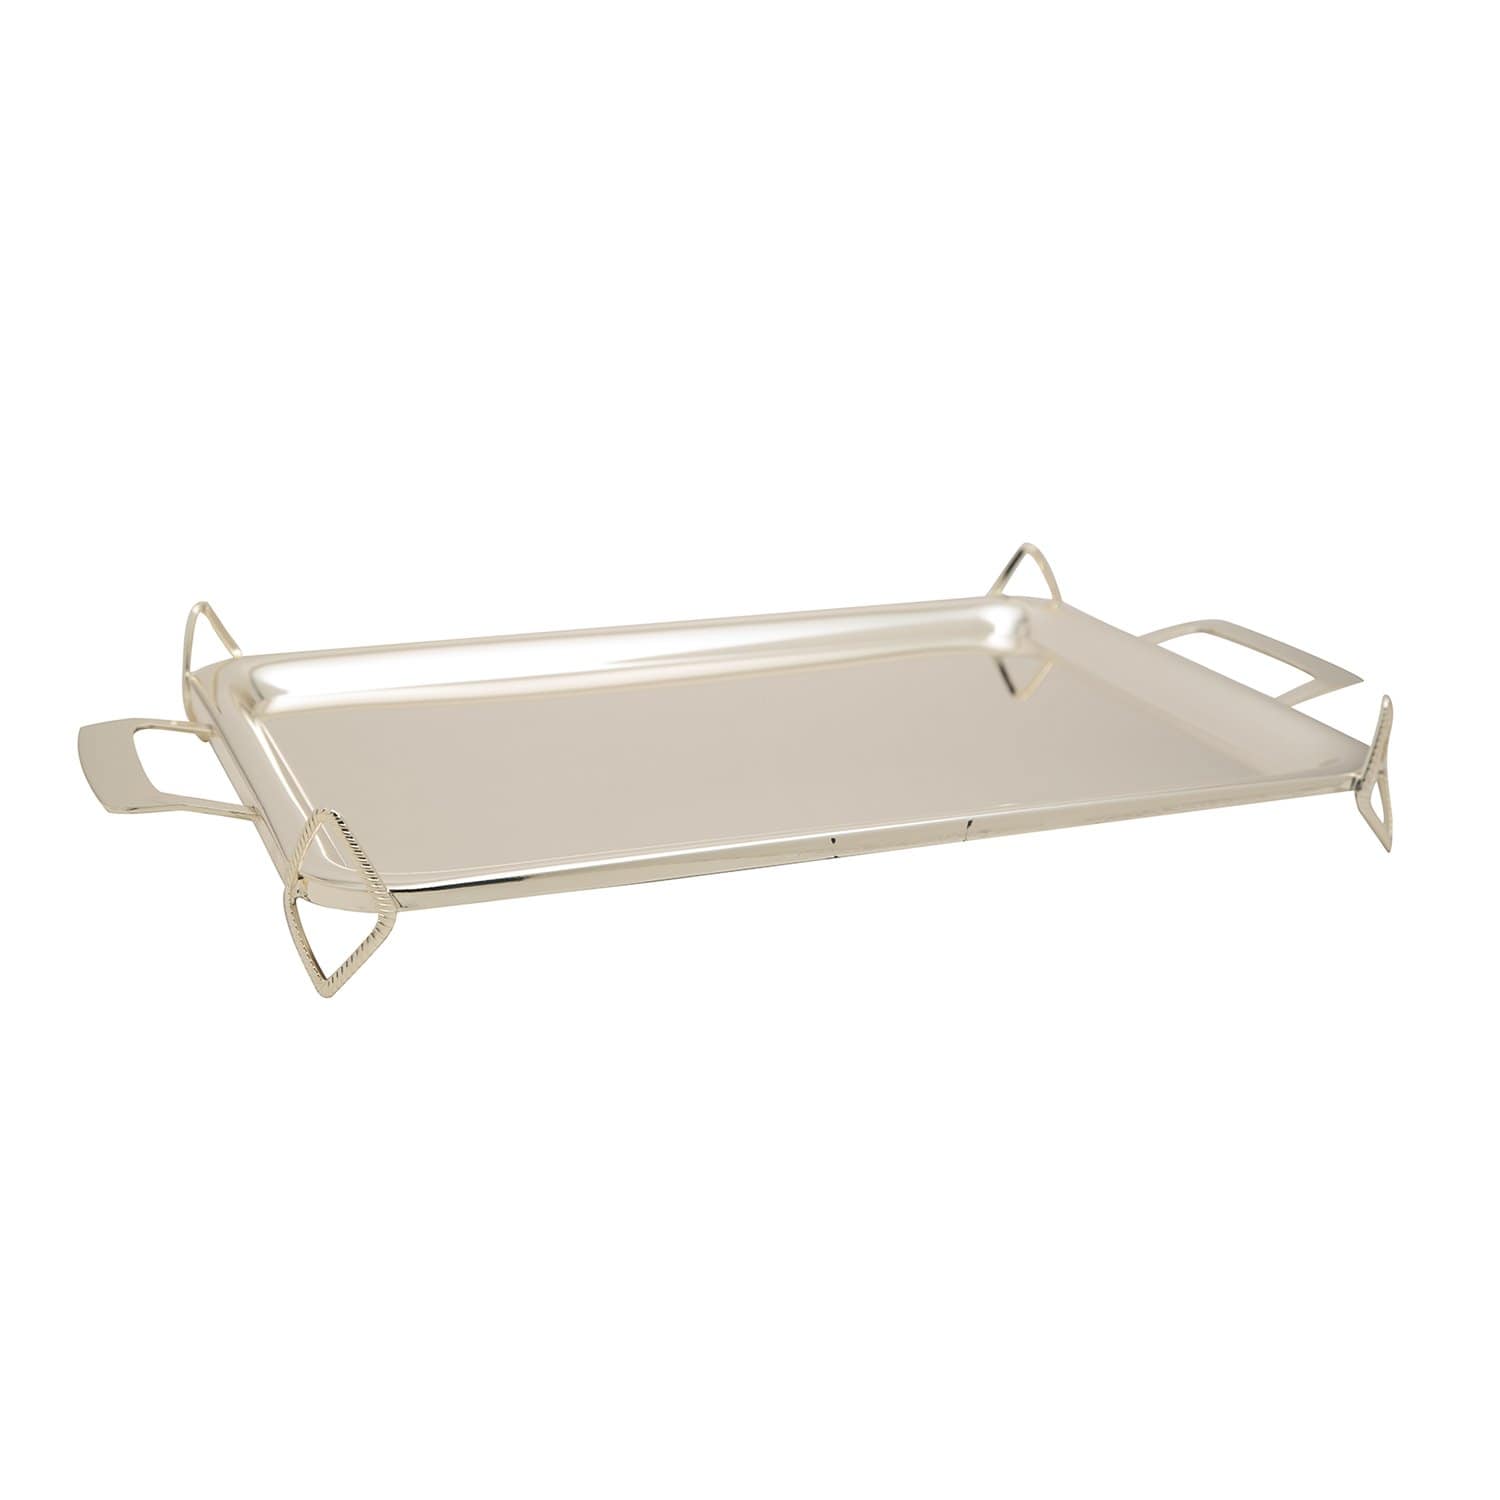 SILVER PLATED RECTANGLE TRAY WITH HANDLE & FEET